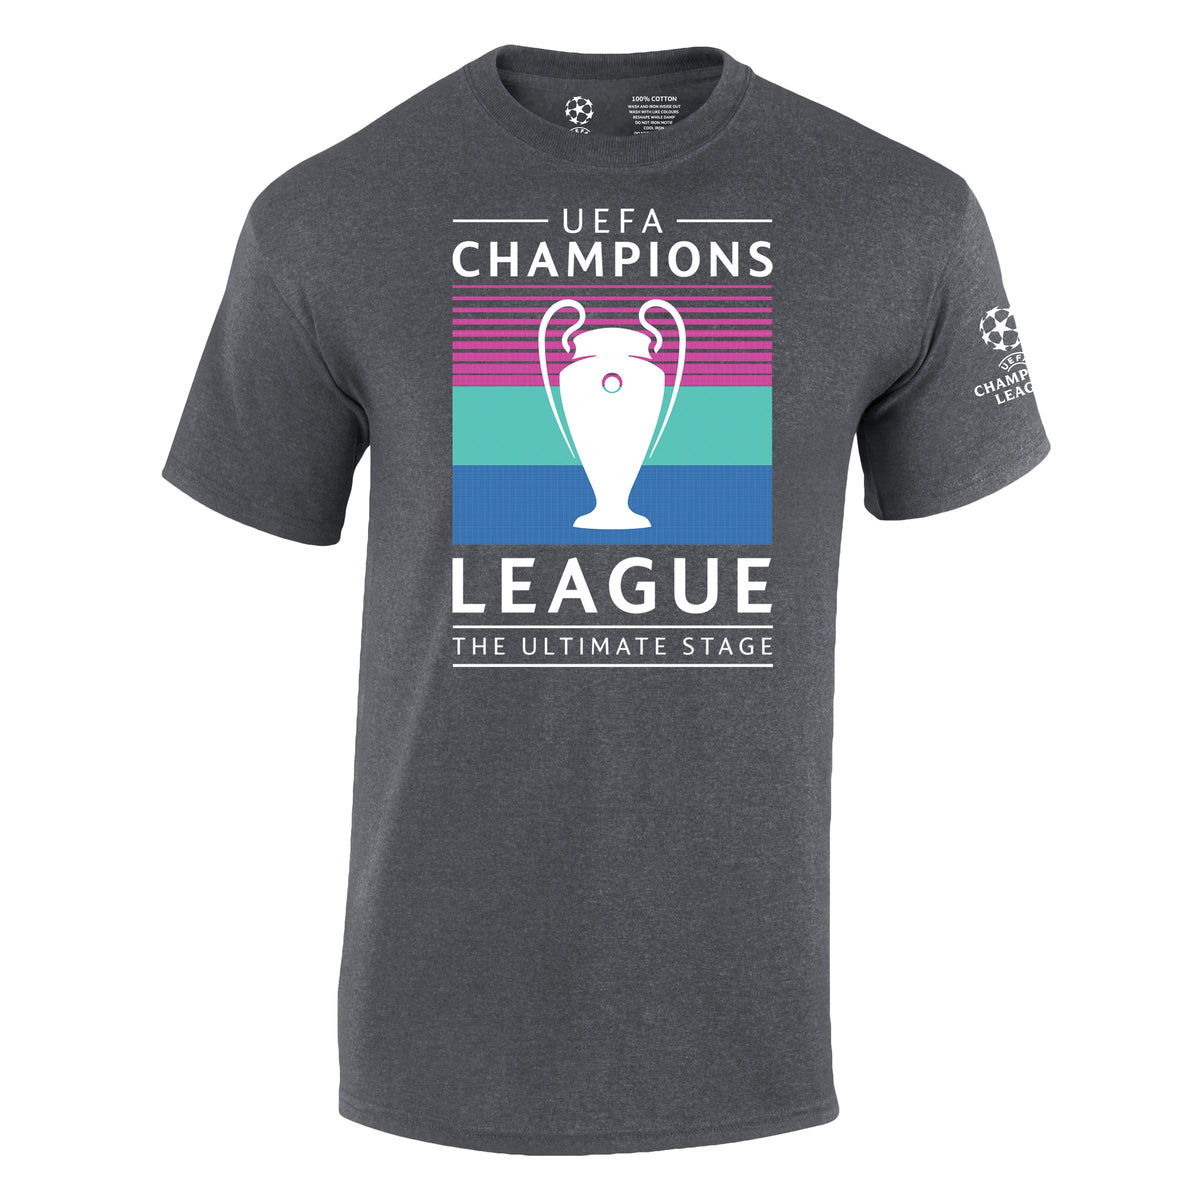 Champions League 'The Ultimate Stage' T-Shirt Charcoal